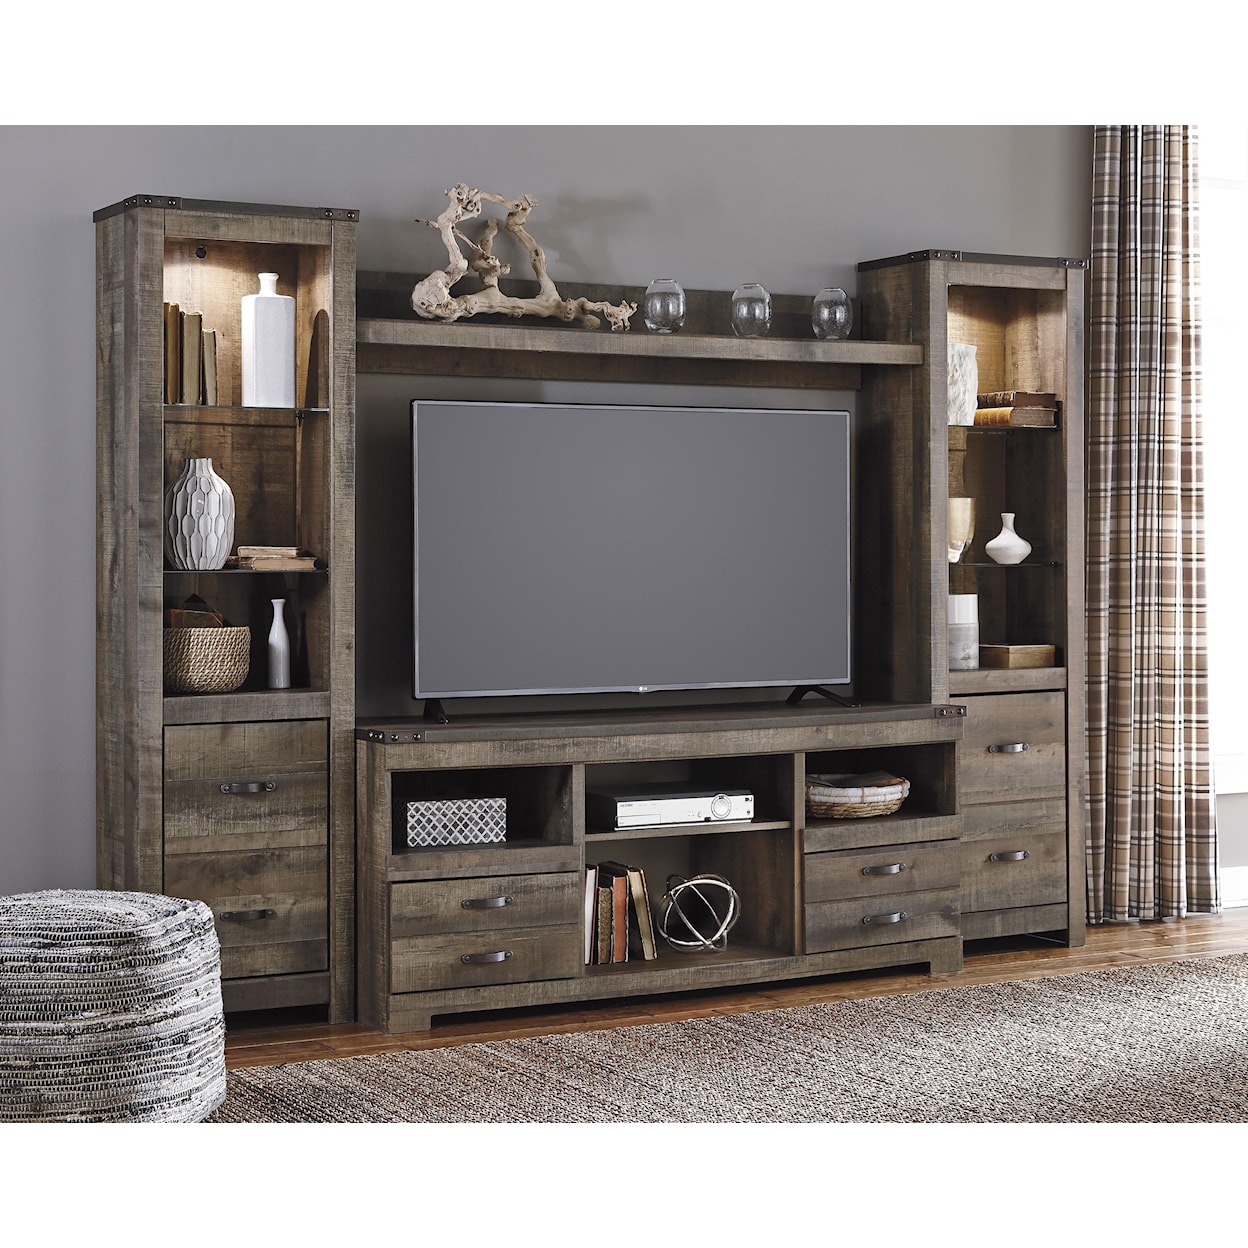 Signature Design by Ashley Trinell Large TV Stand & 2 Tall Piers w/ Bridge